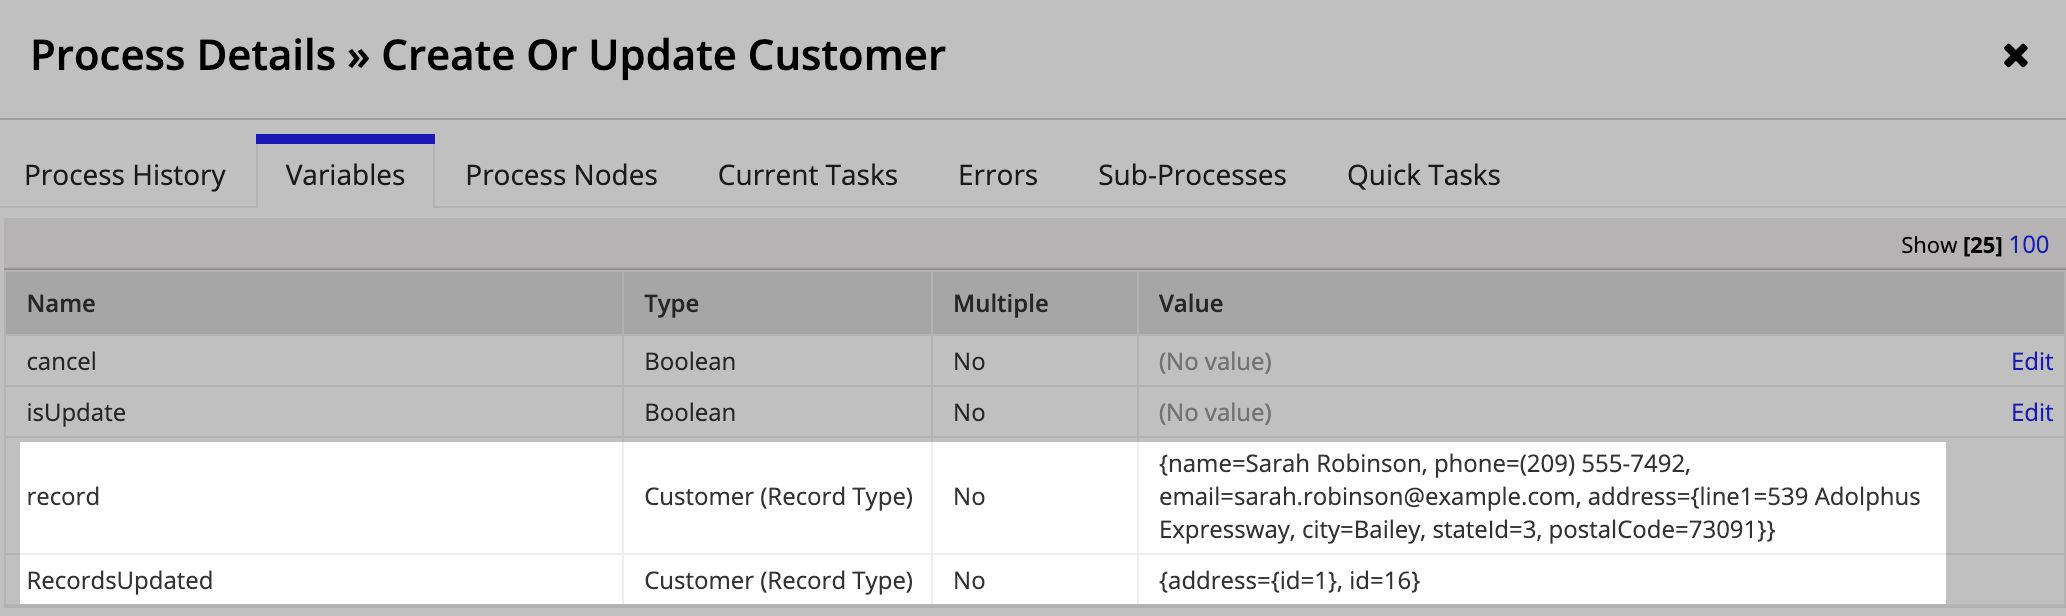 List of process variables showing related record data for Cases nested in the Customer record data